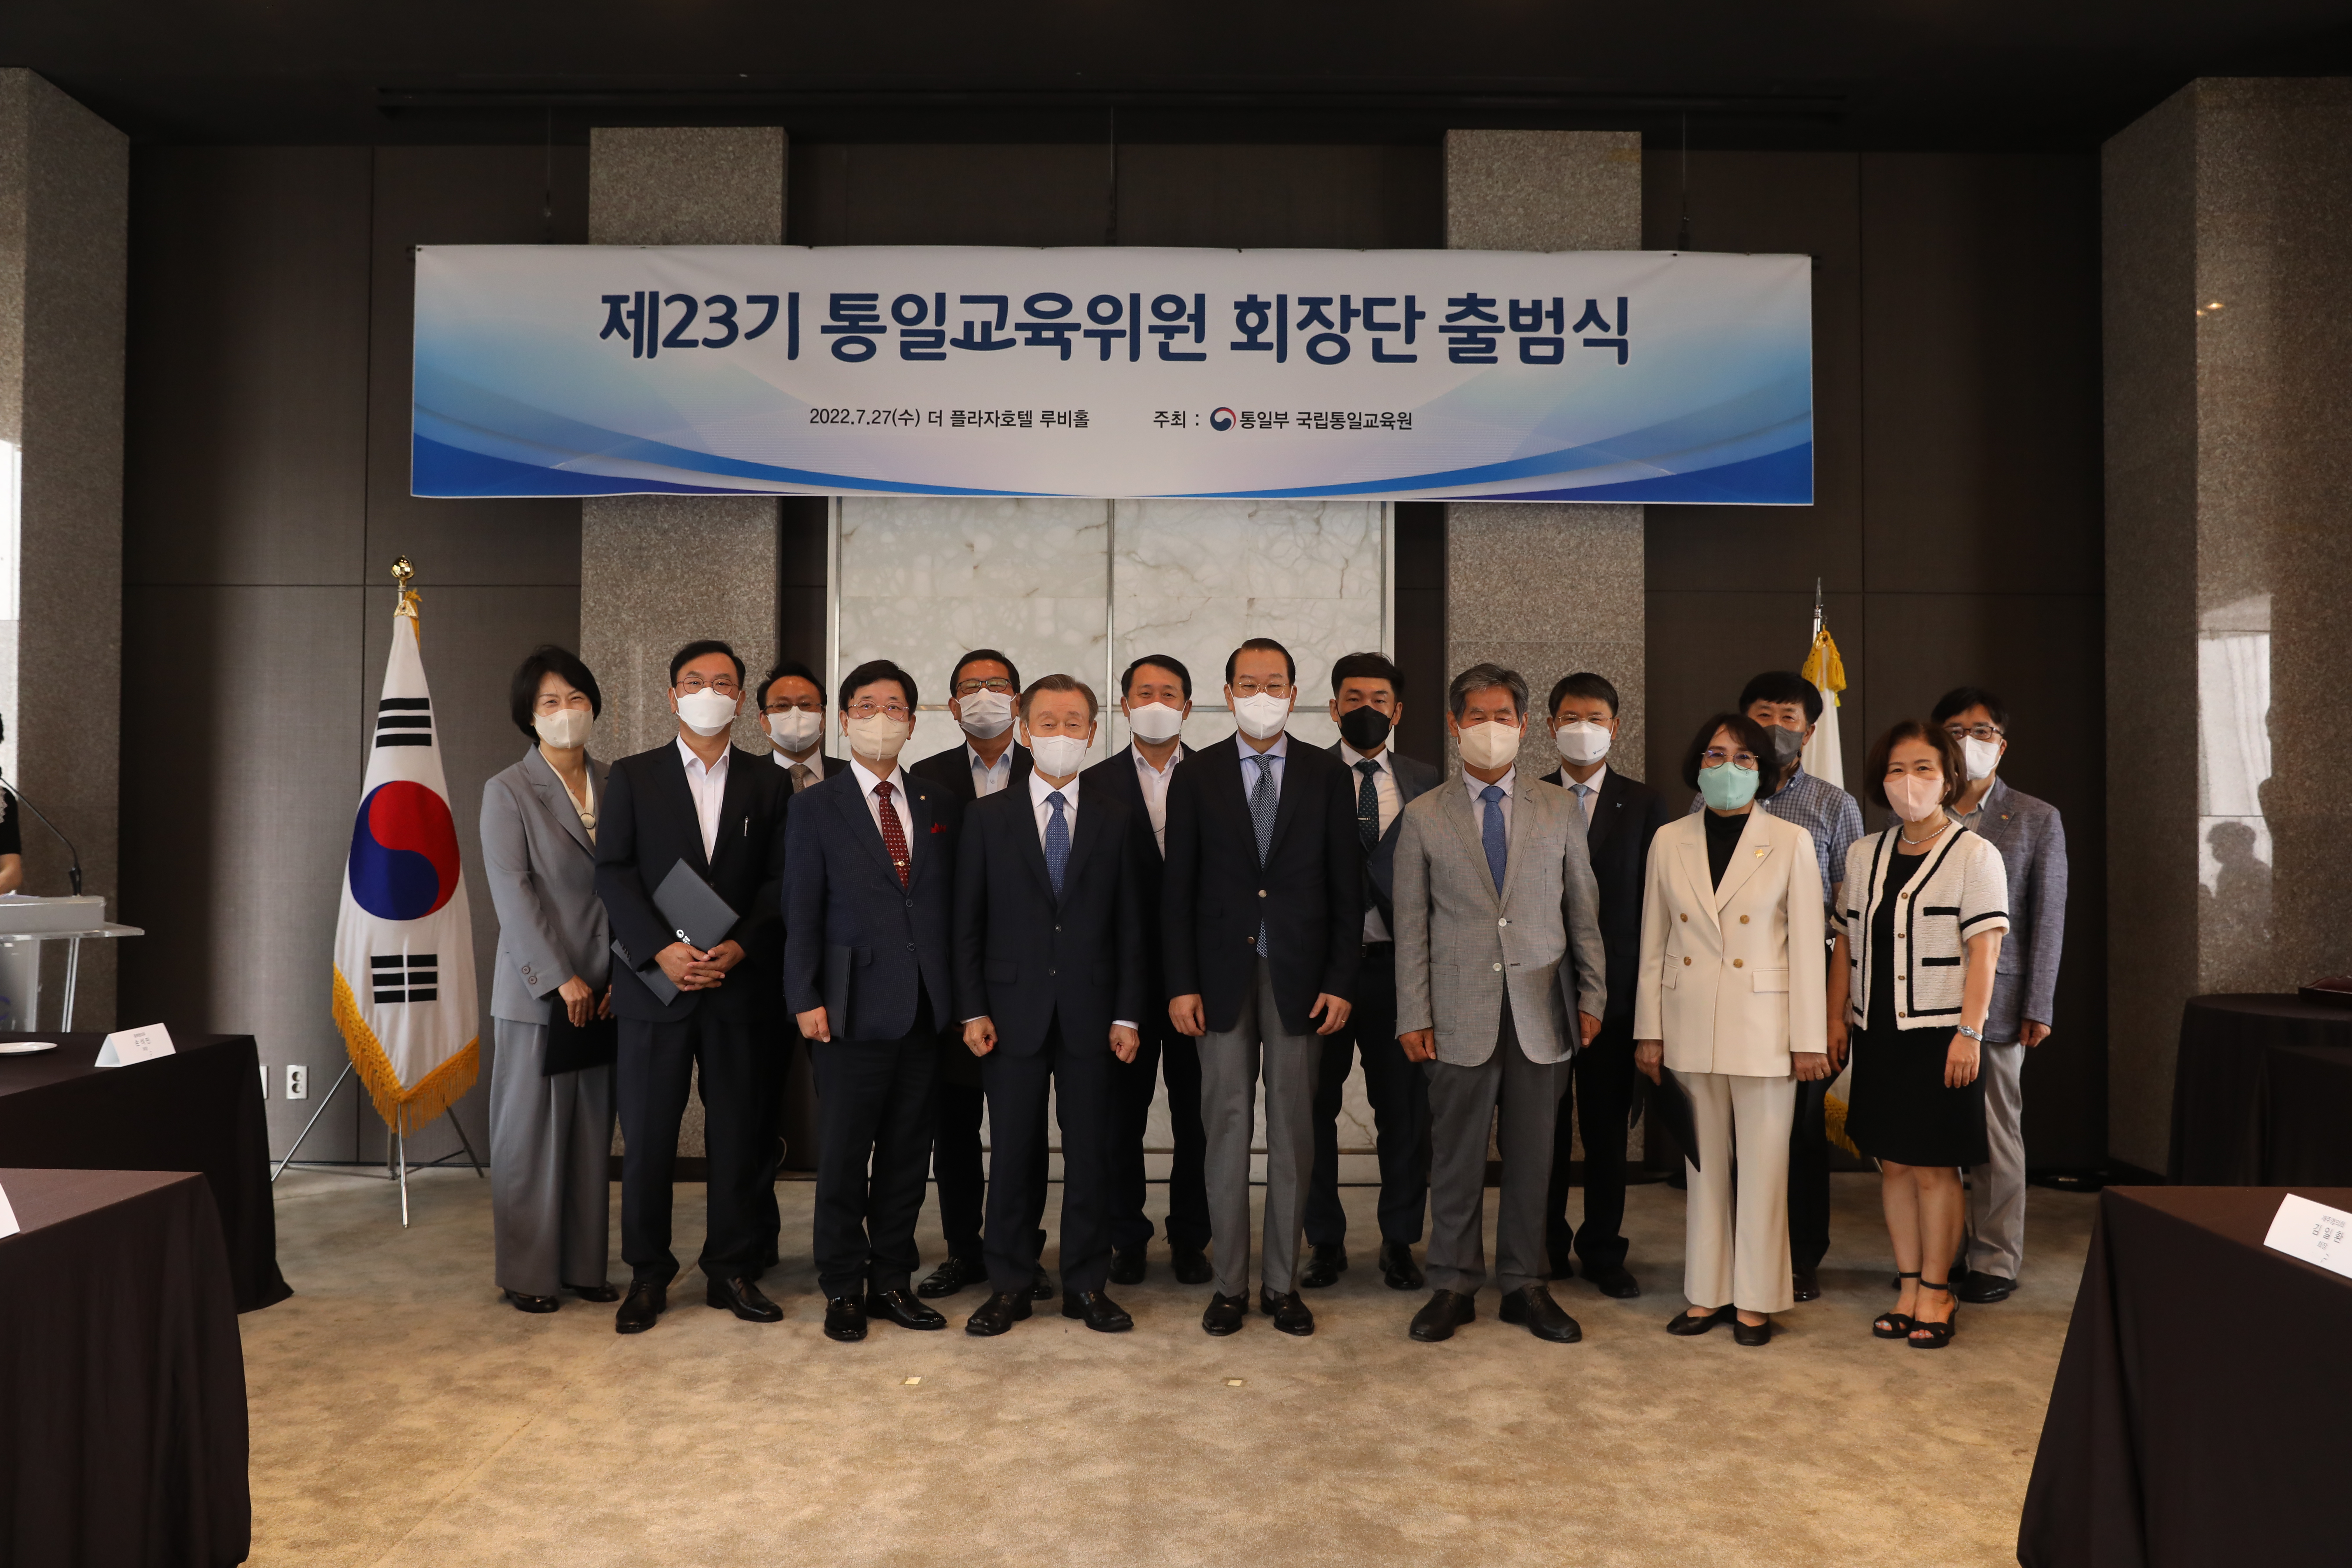 Unification Minister Kwon Youngse congratulates launch of Unification Education Officials